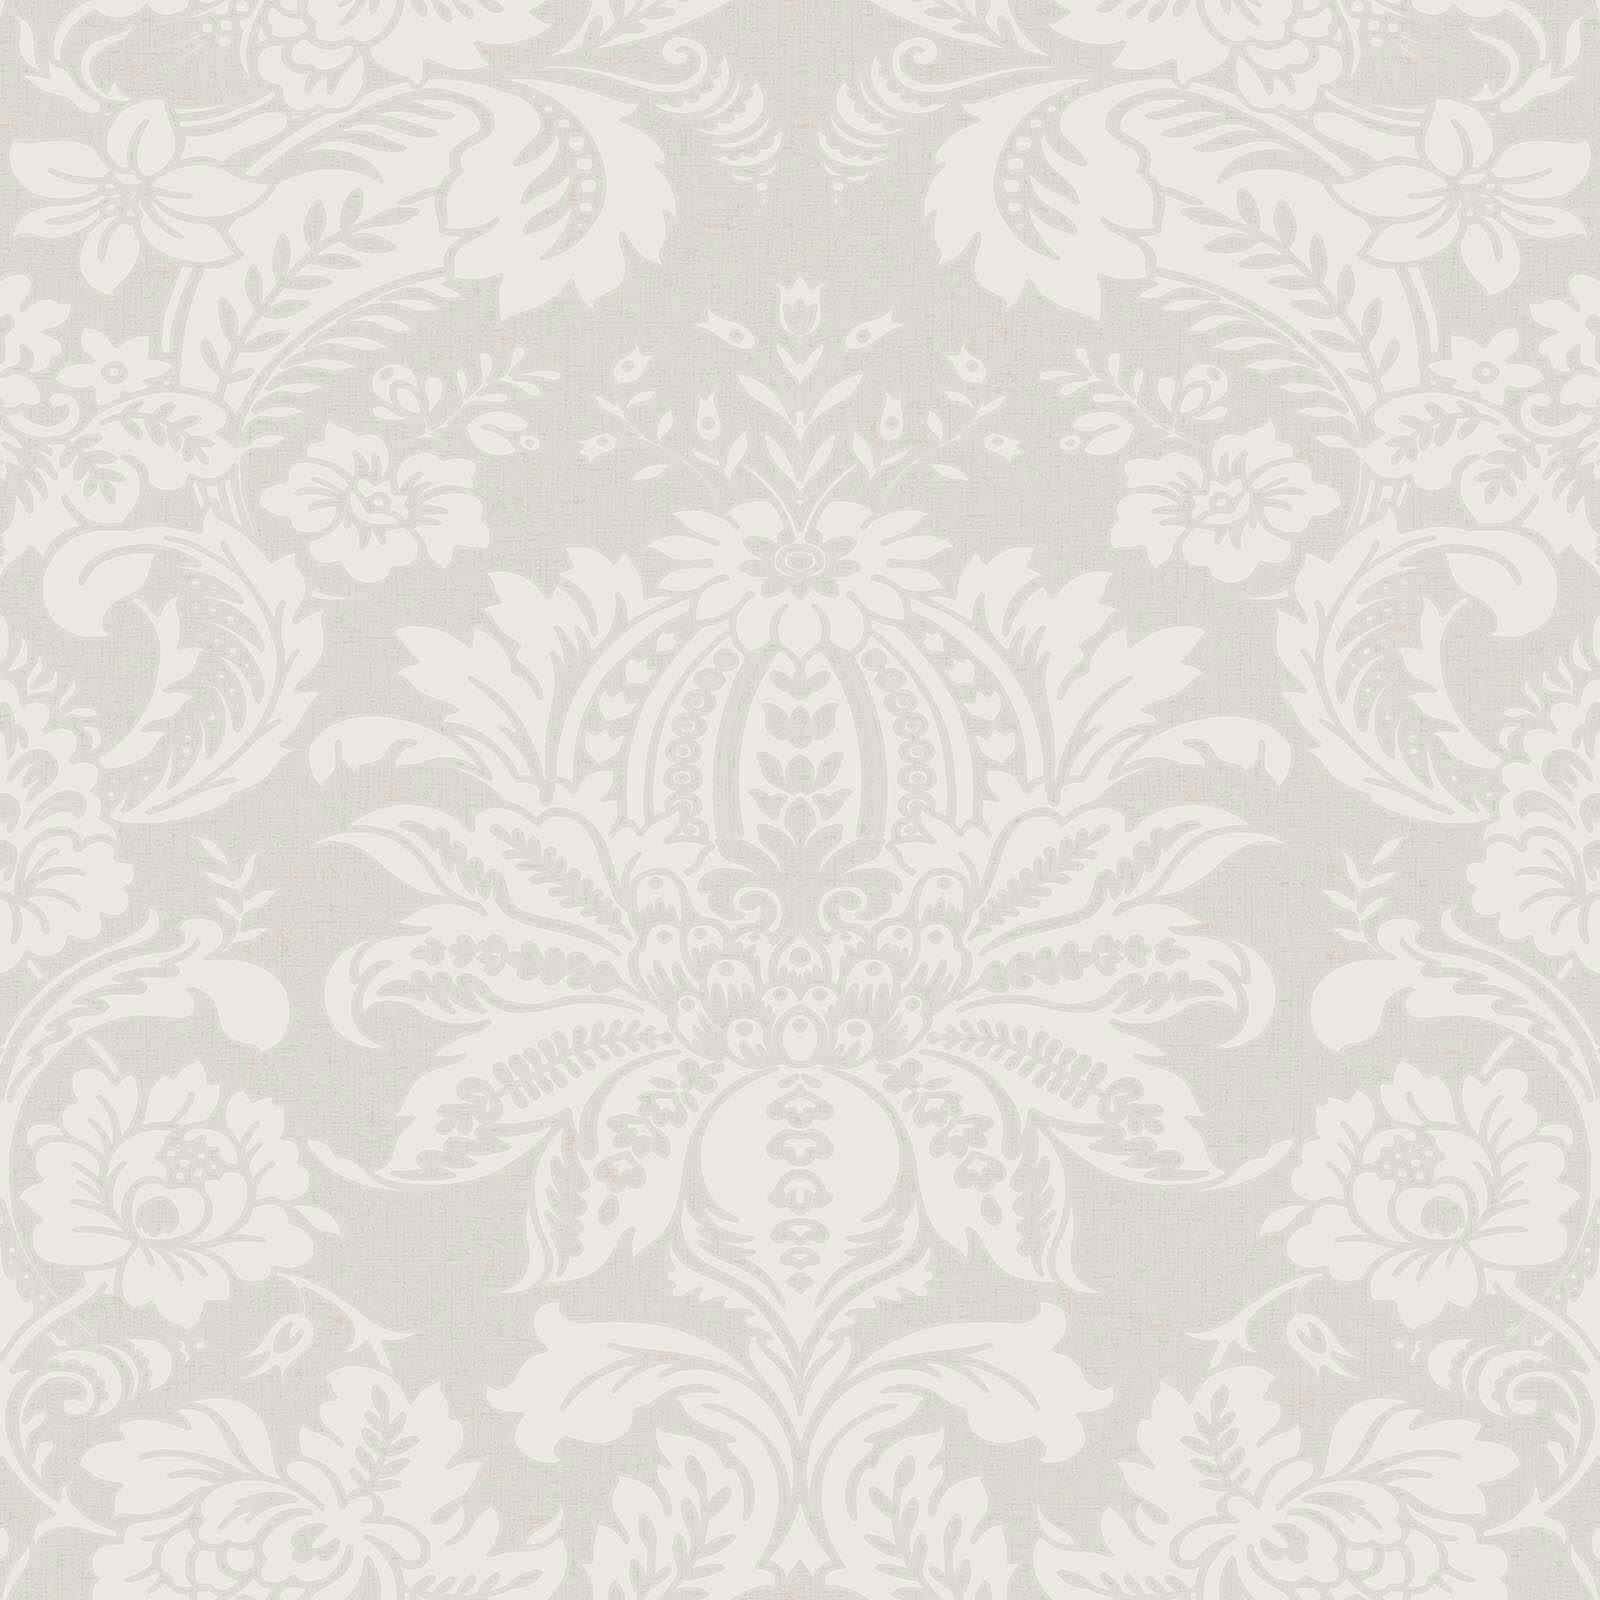 Superfresco Easy Floral Damask Taupe Wallpaper